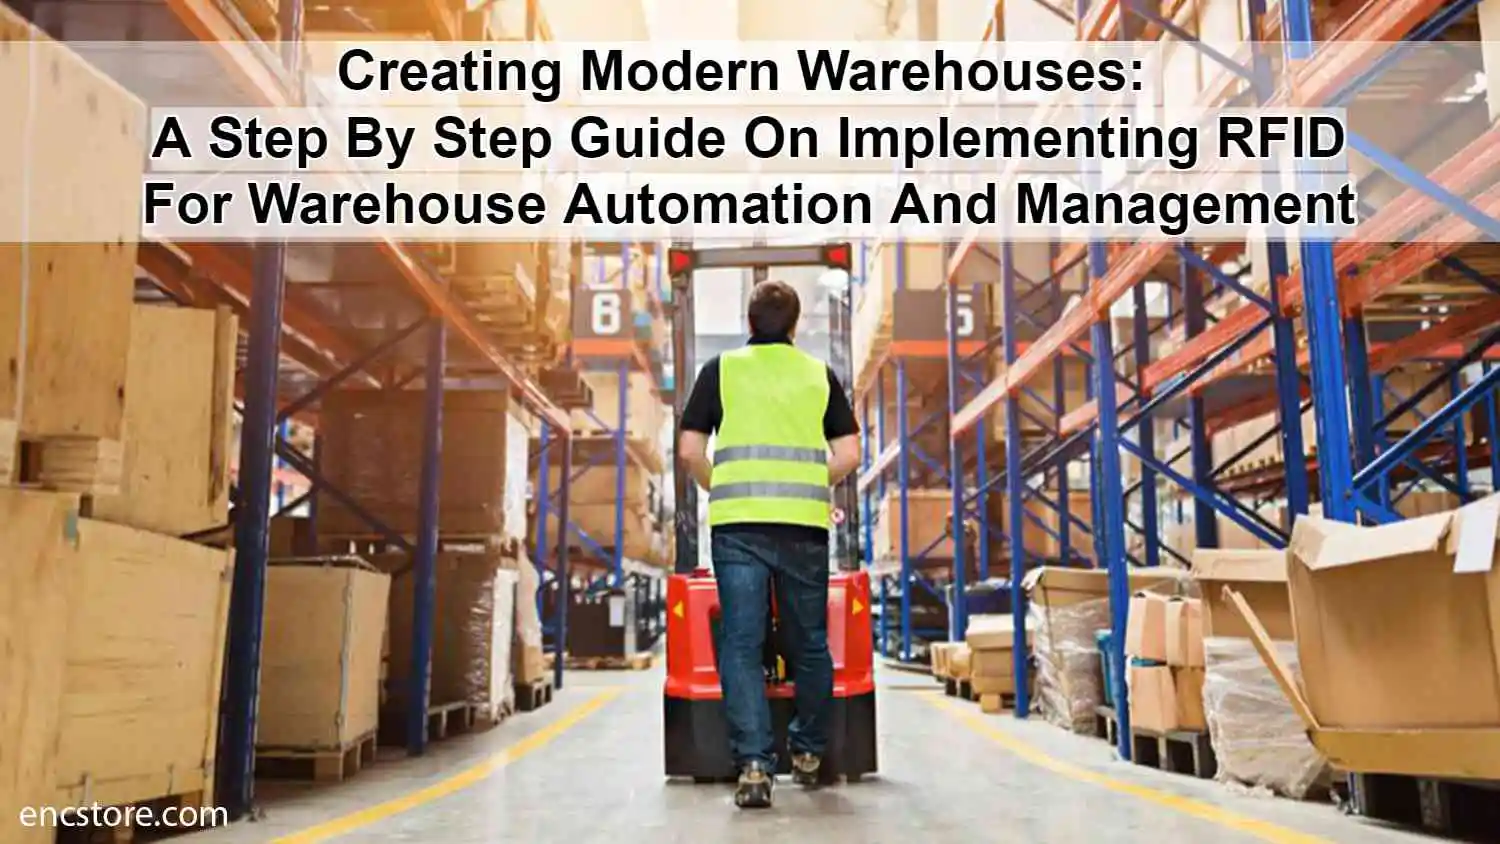 RFID for warehouse automation and management